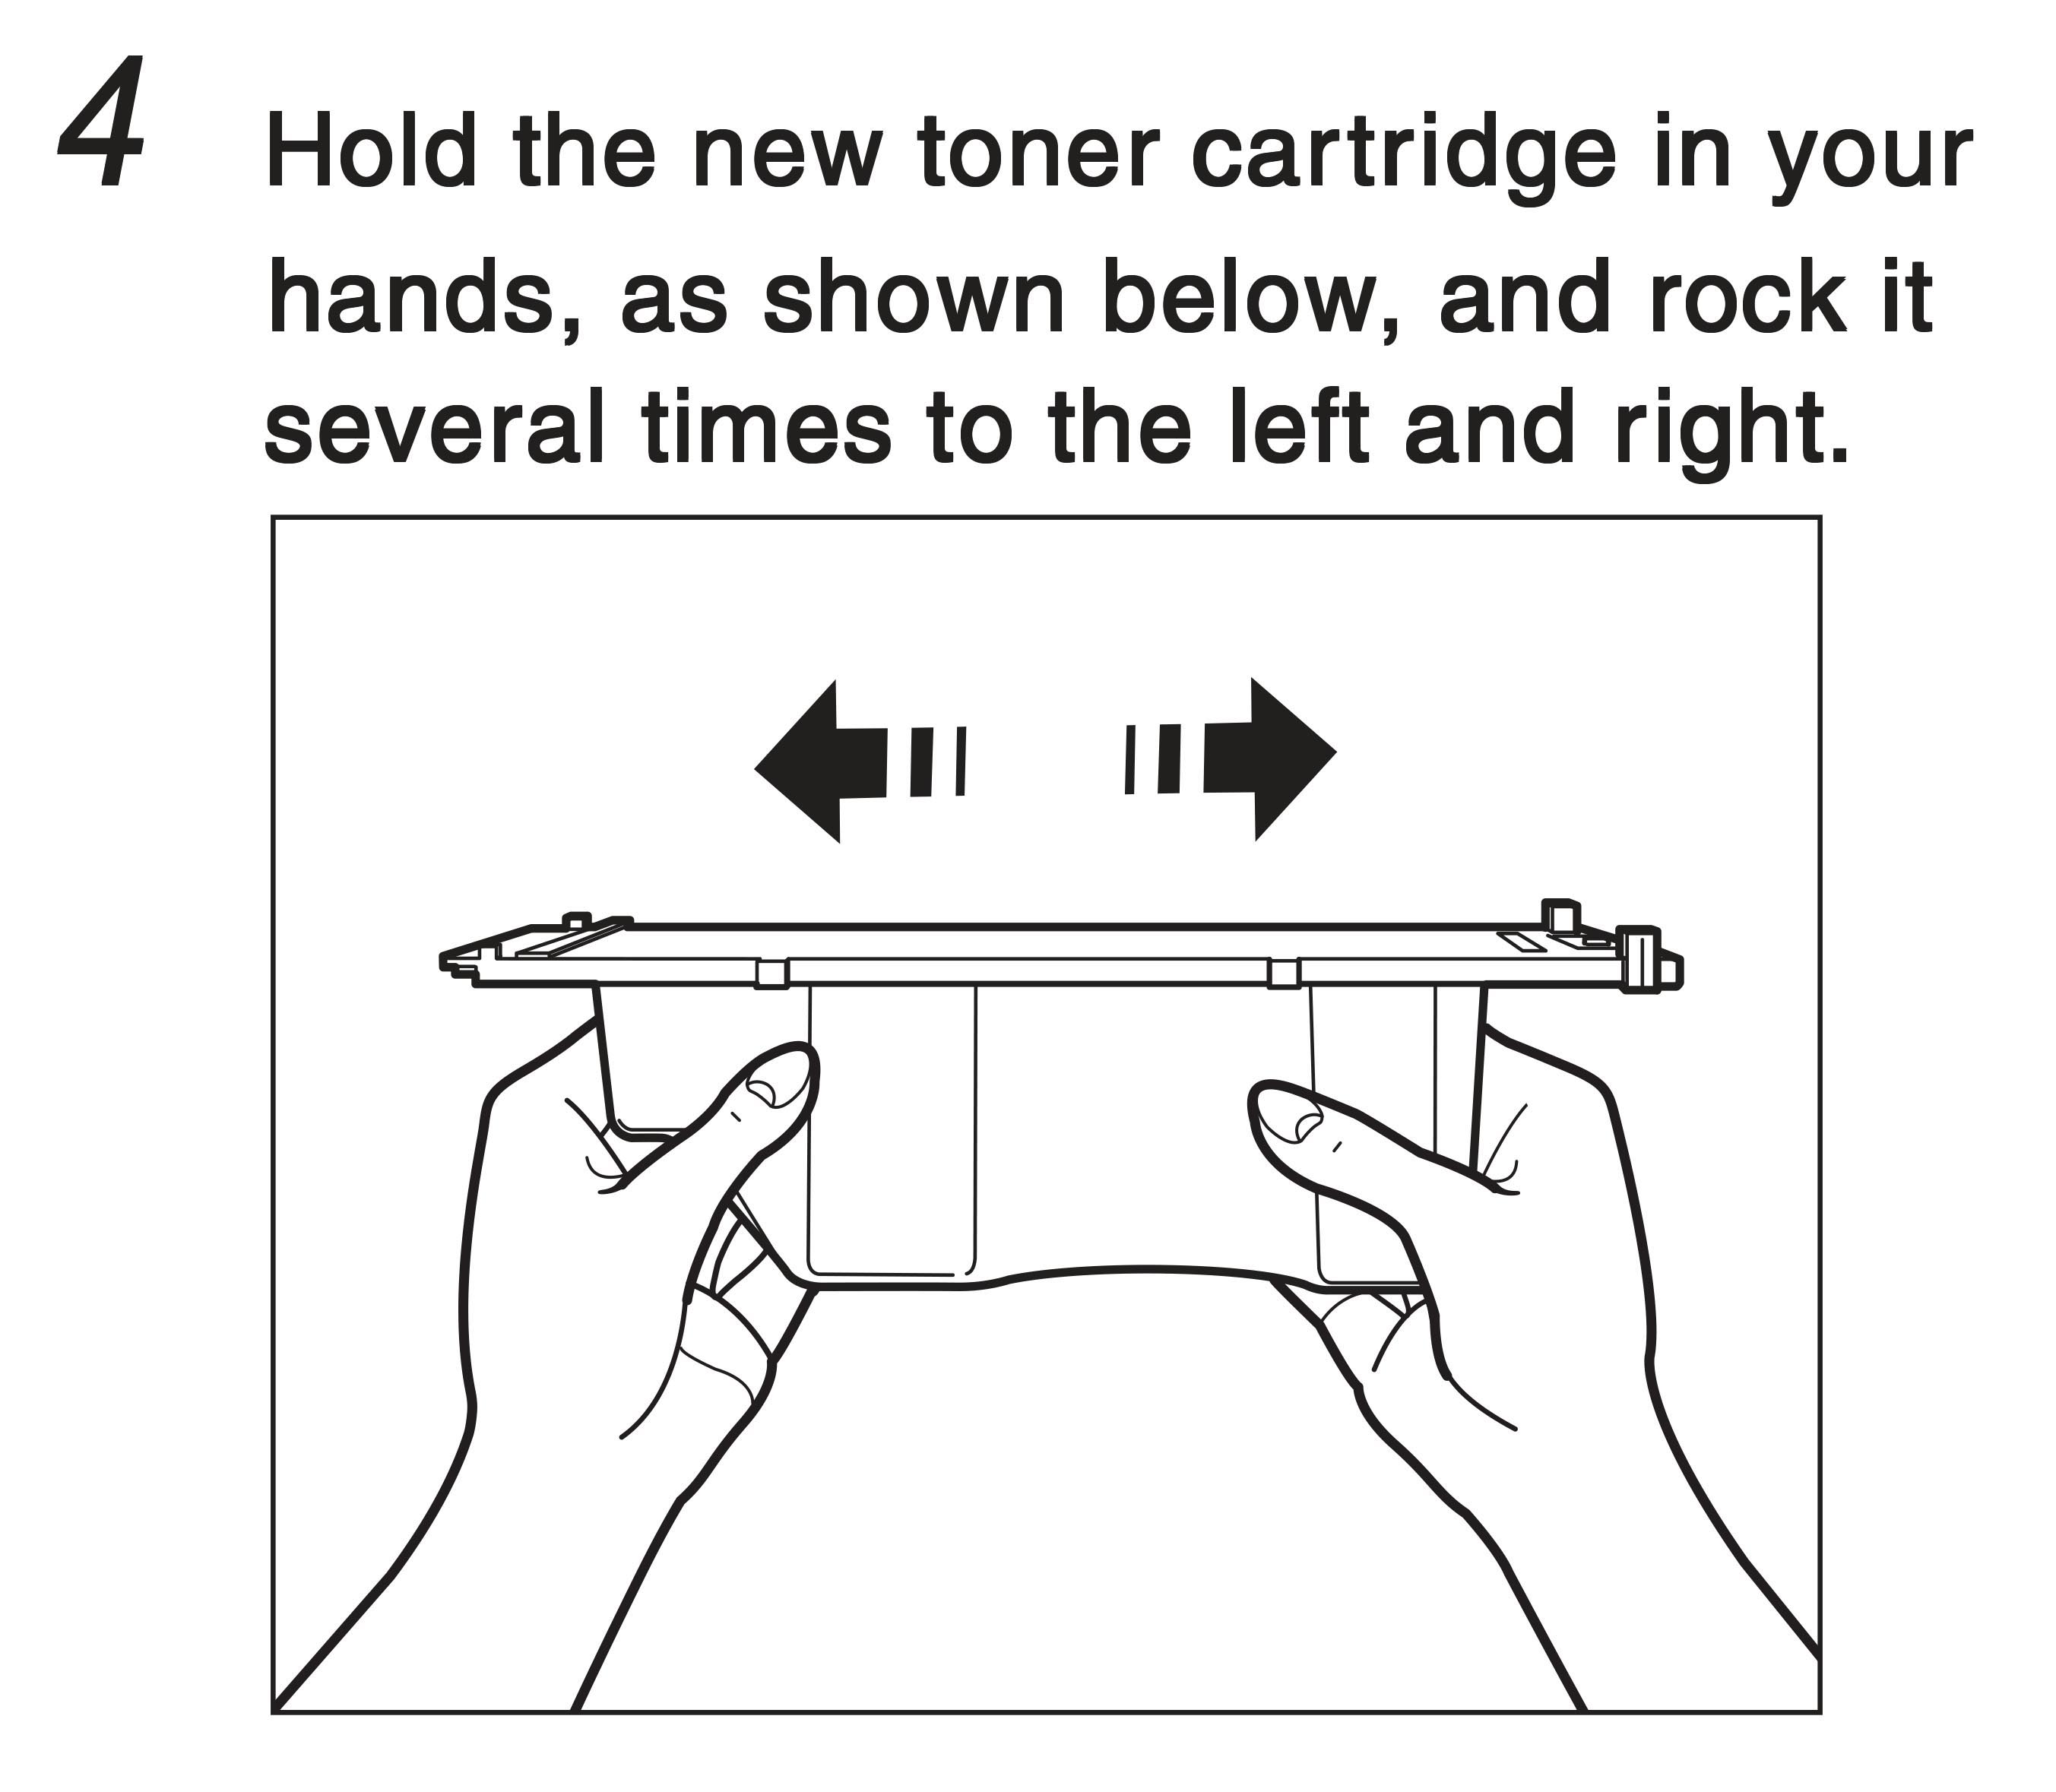 4. Hold the new toner cartridge in your hands, as shown below, and rock it several times to the left and right. 